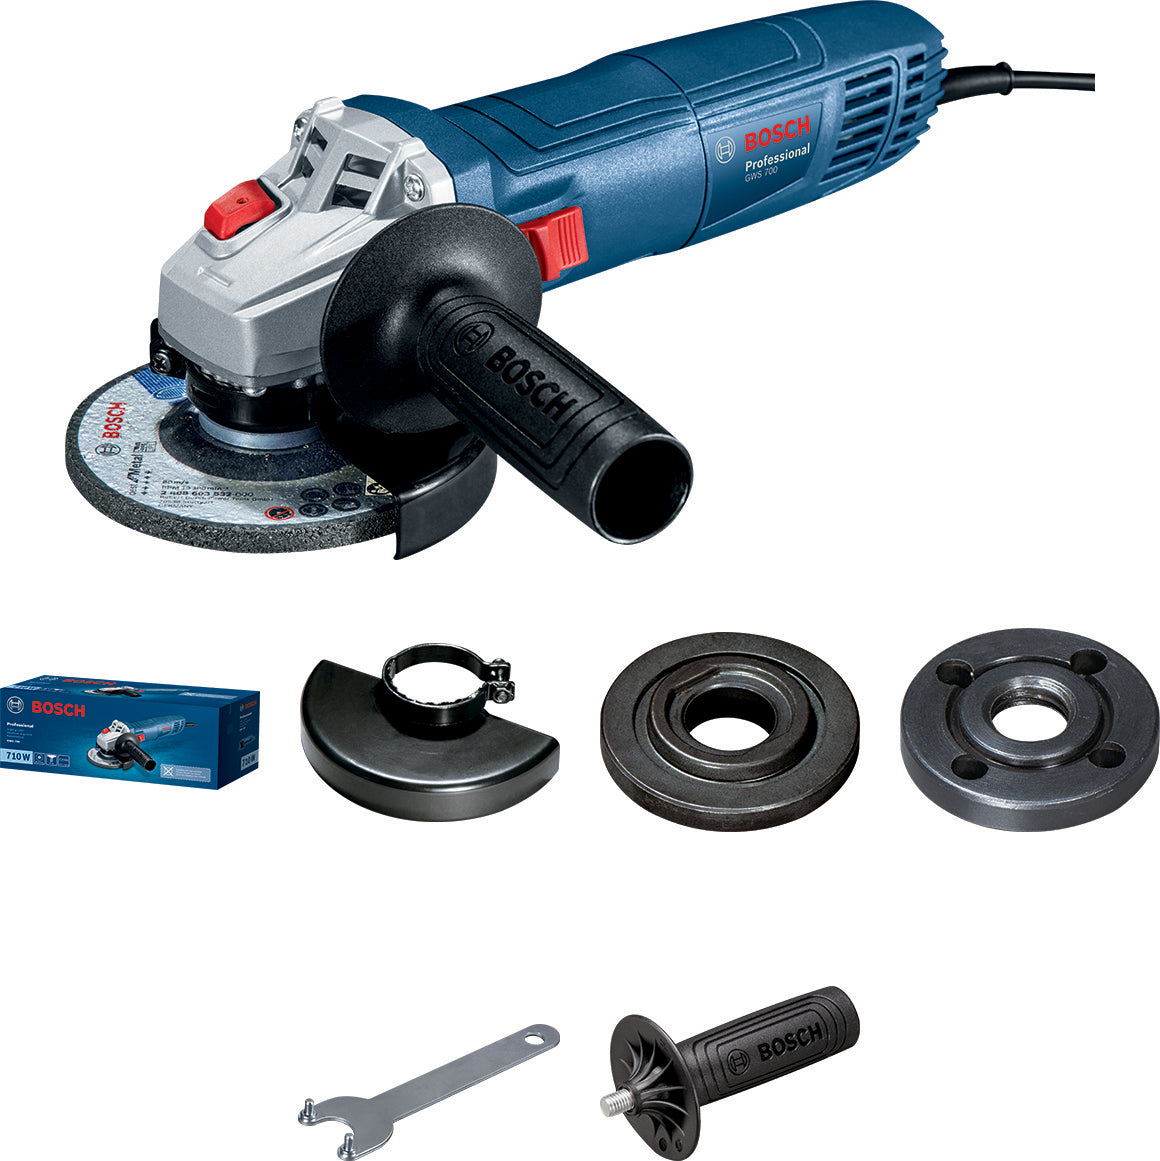 Bosch Professional 115Mm Angle Grinder GWS 700 06013A30K0 Power Tool Services